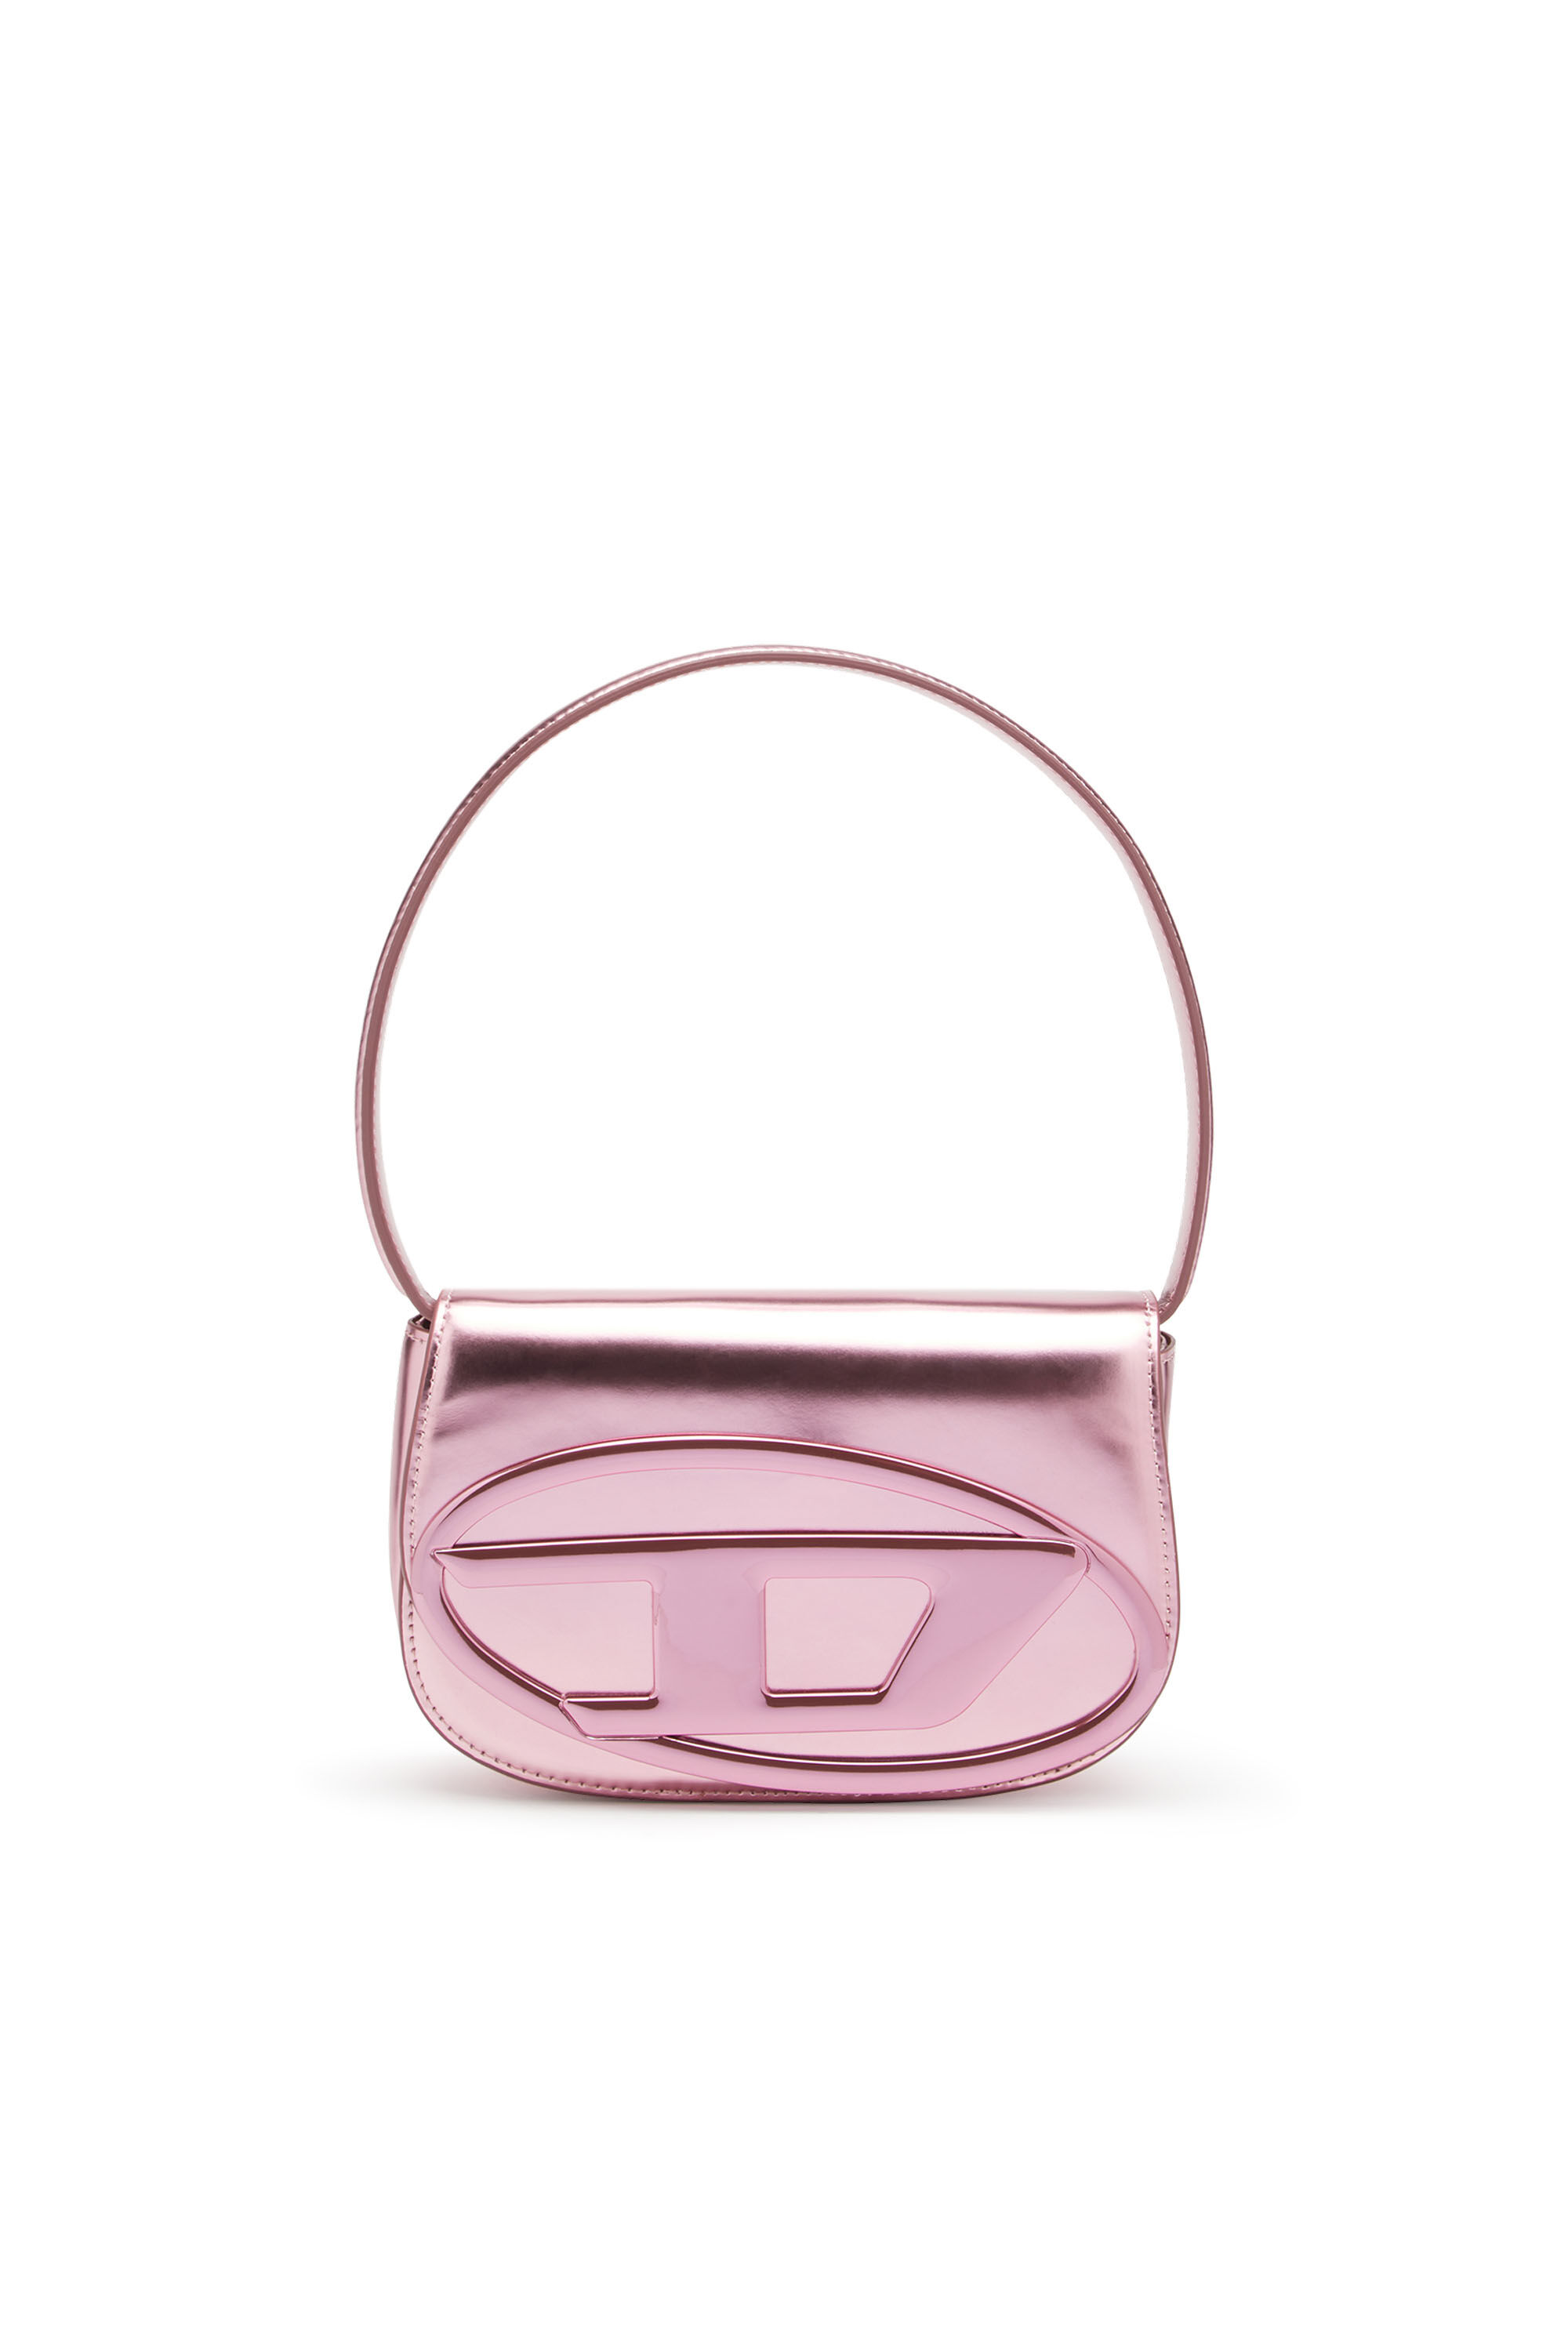 Diesel - 1DR, Woman 1DR-Iconic shoulder bag in mirrored leather in Pink - Image 1